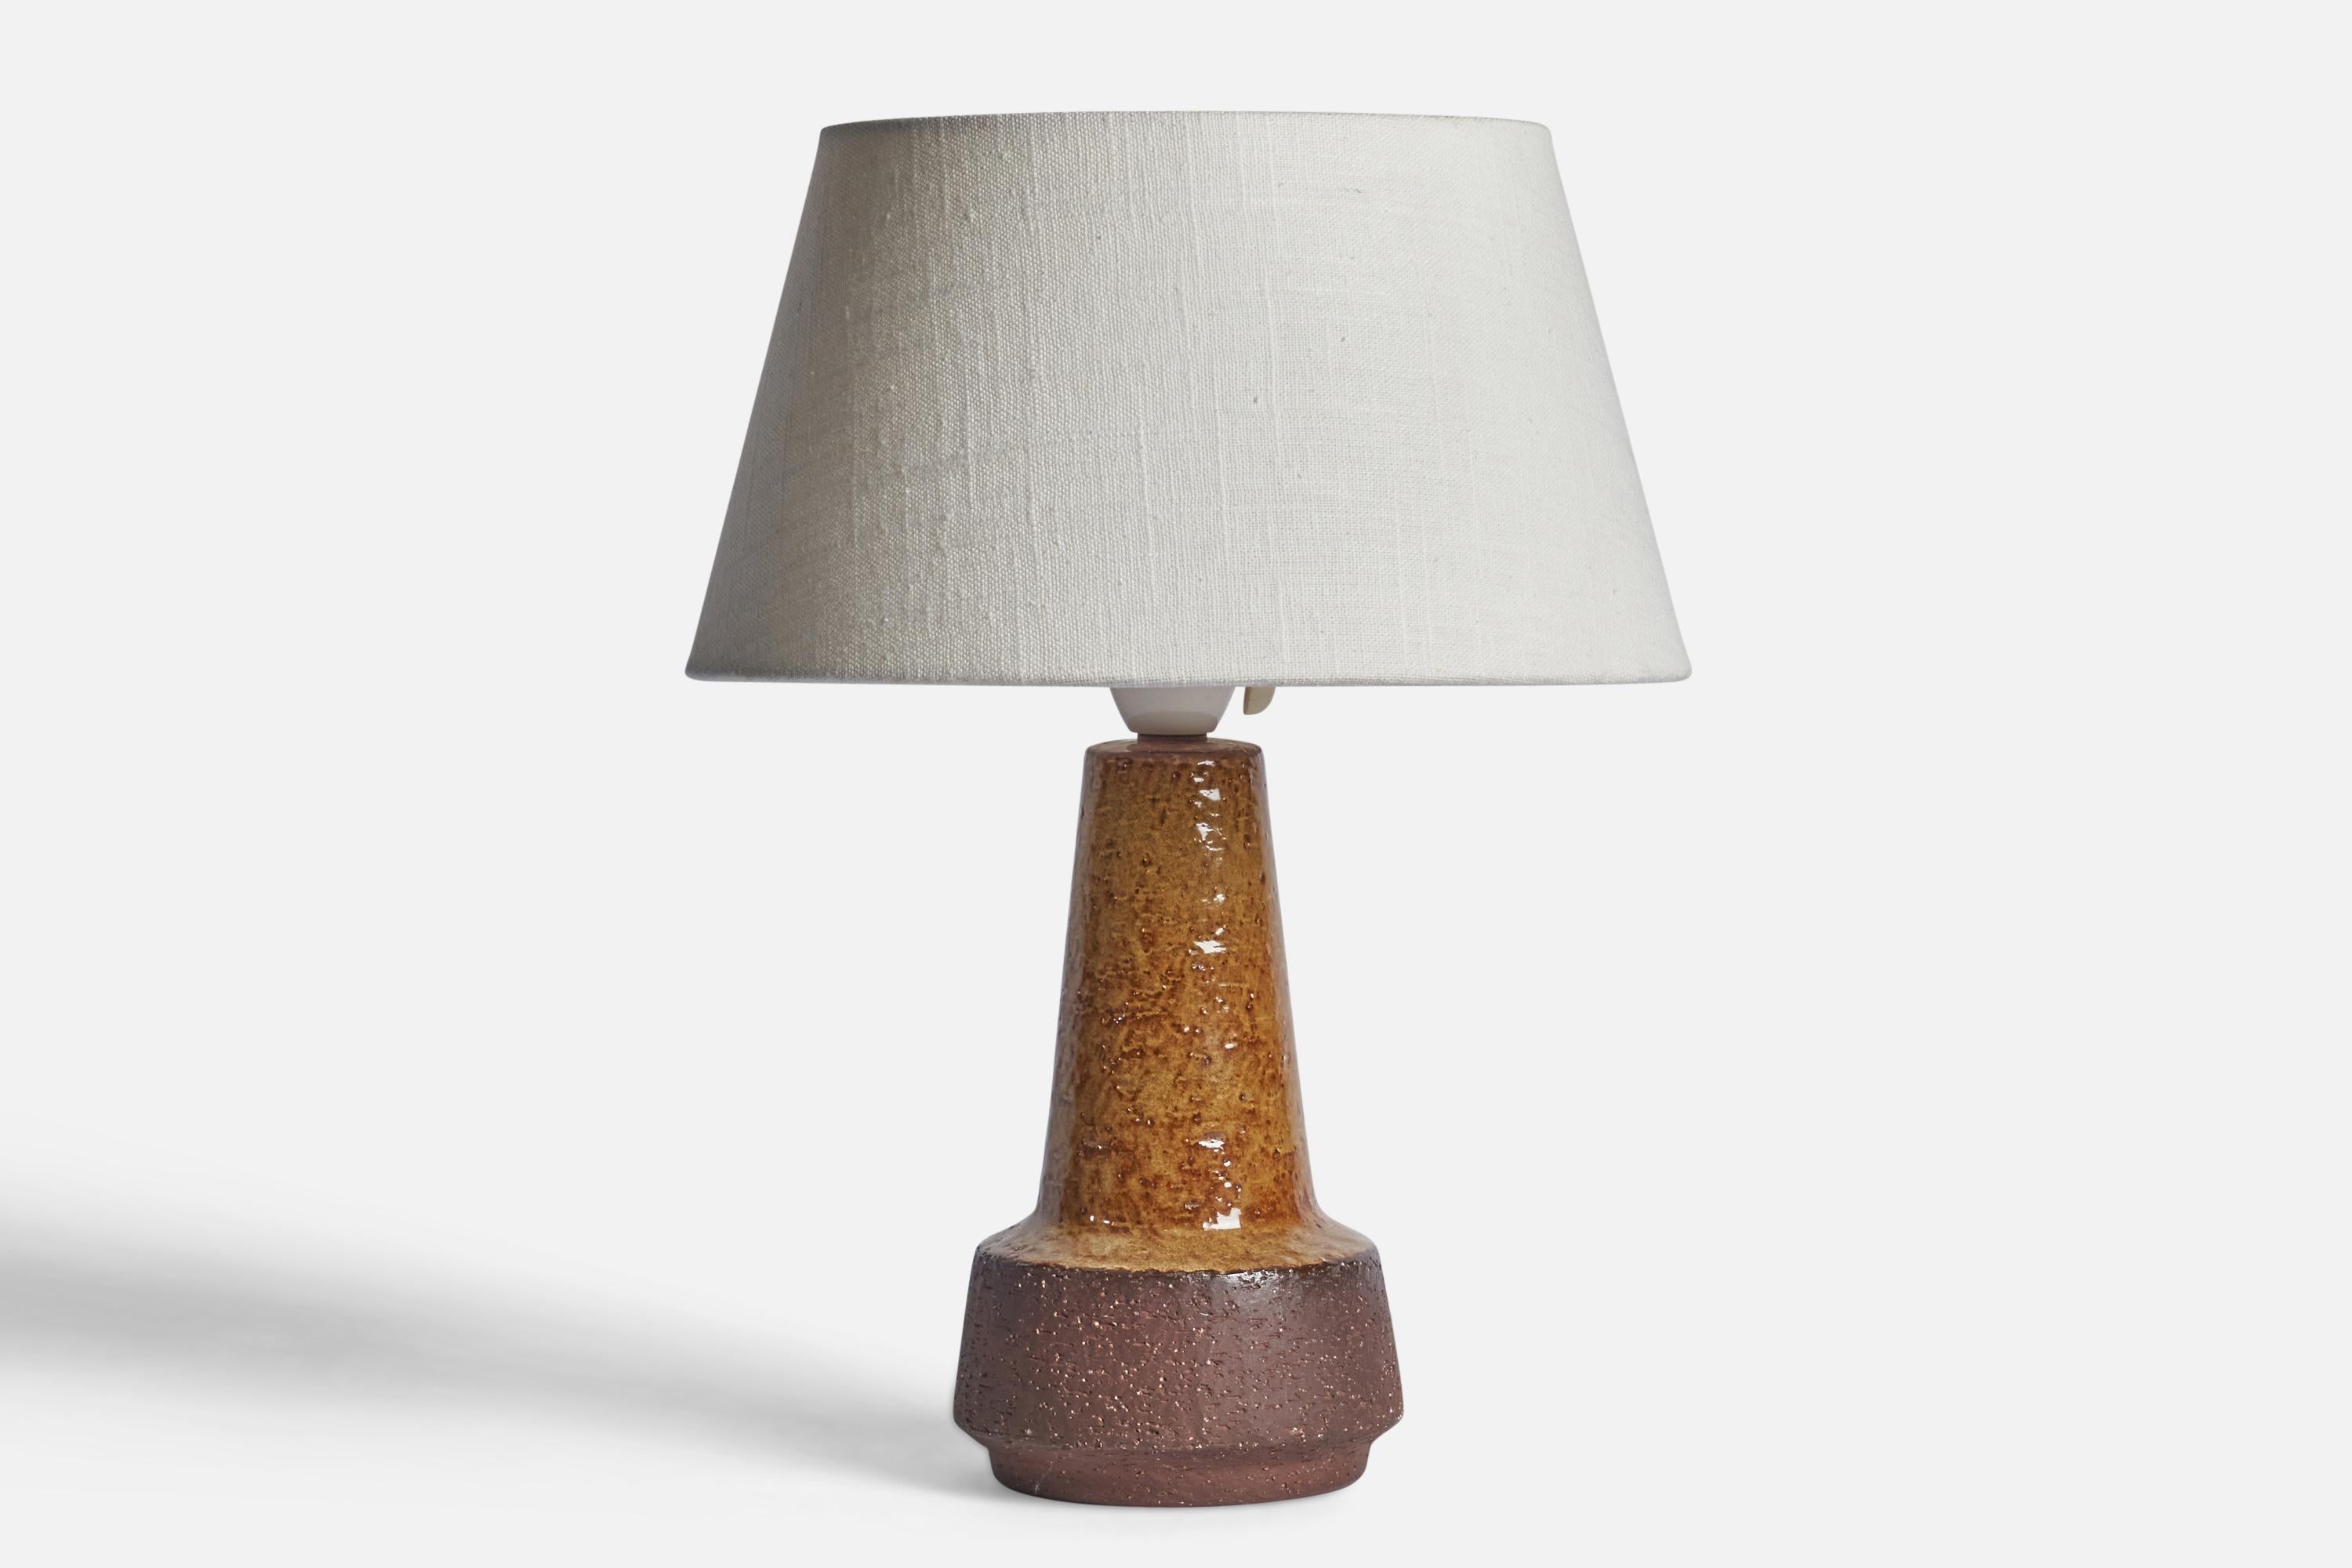 A brown semi-glazed table lamp designed and produced by Michael Andersen, Bornholm, Denmark, 1960s.

Dimensions of Lamp (inches): 10.5” H x 4.75 Diameter
Dimensions of Shade (inches): 7” Top Diameter x 10” Bottom Diameter x 5.5” H
Dimensions of Lamp